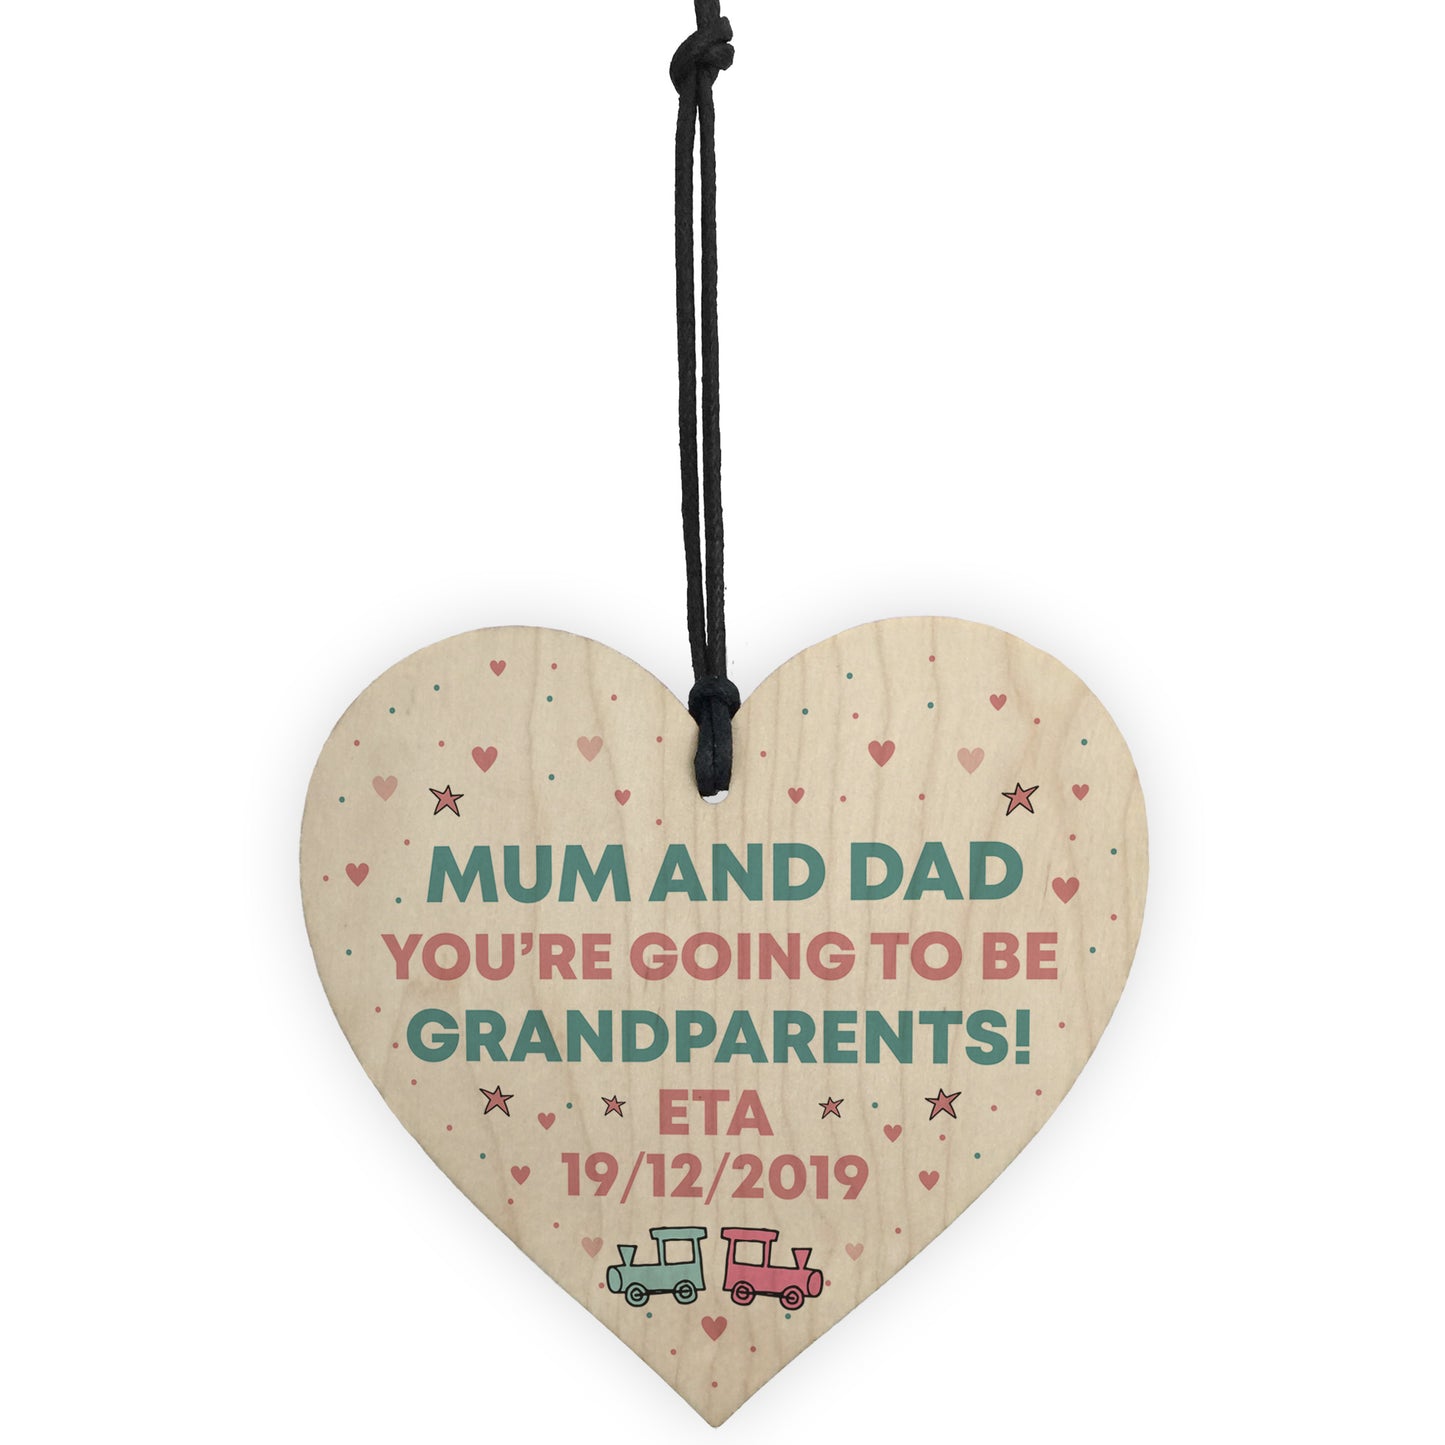 Baby Pregnancy Annoucement Card Wood Heart Gift For Grandparents